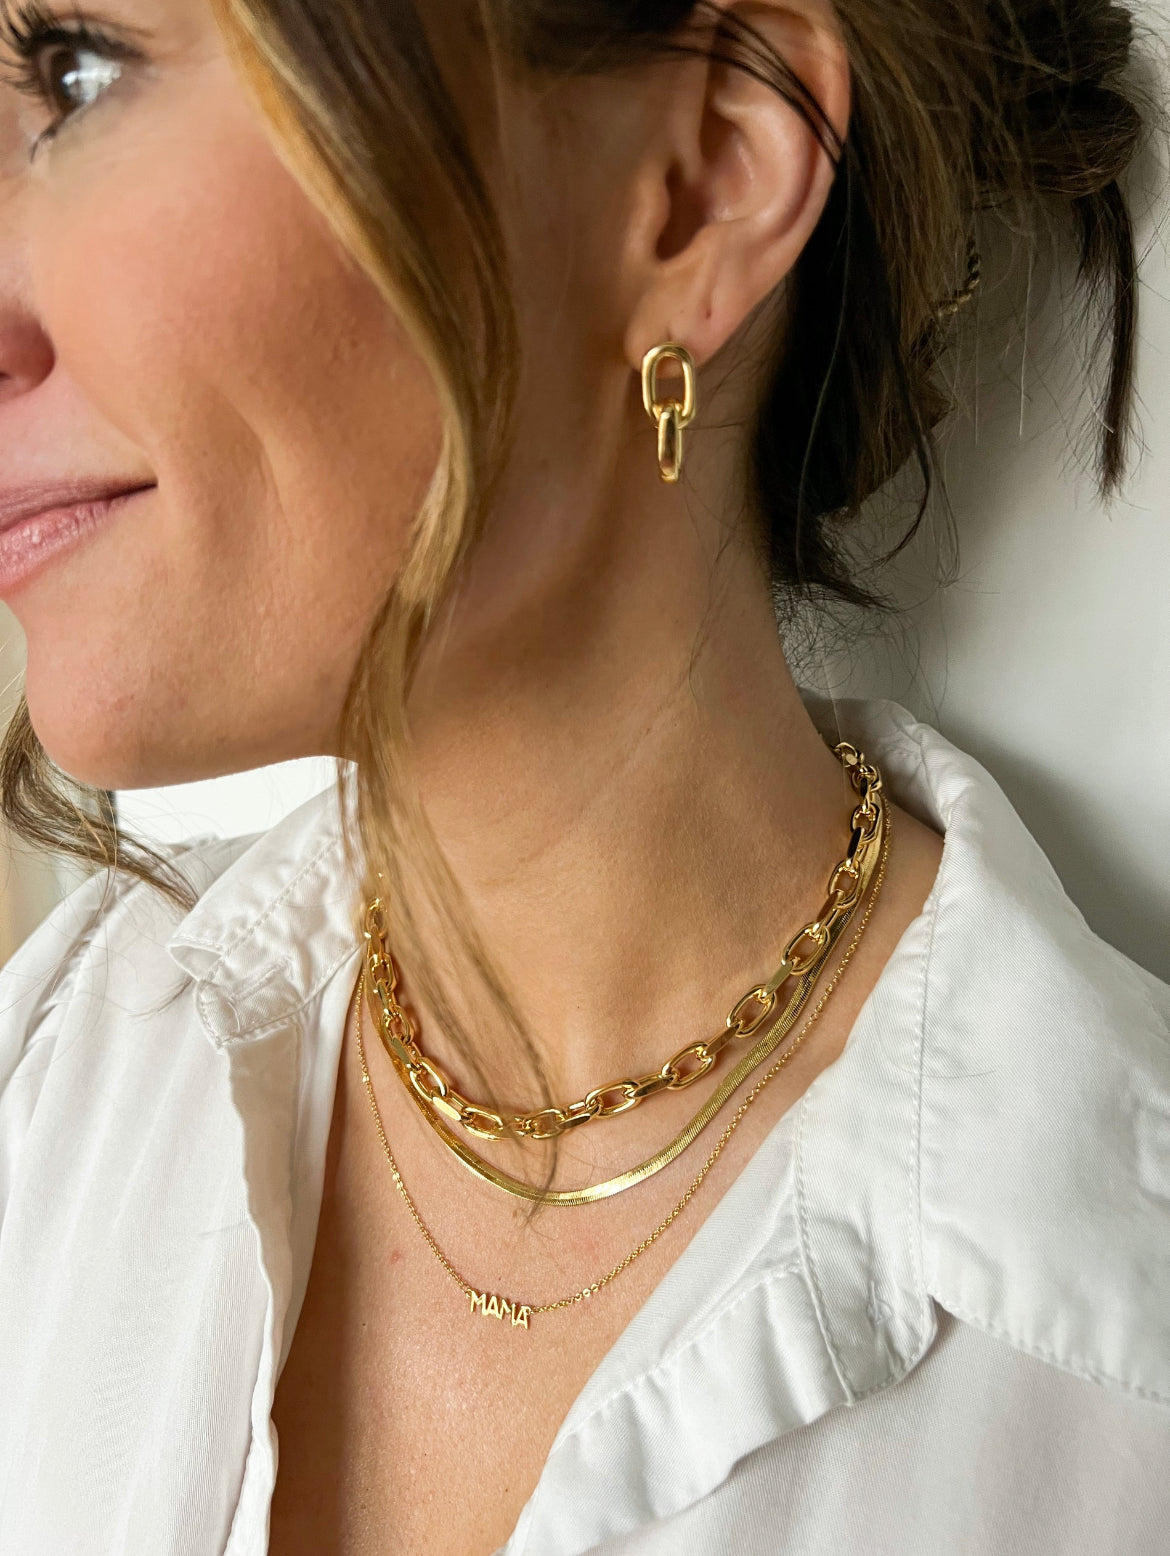 Neck's Best Friend – Coco and Peach Jewelry